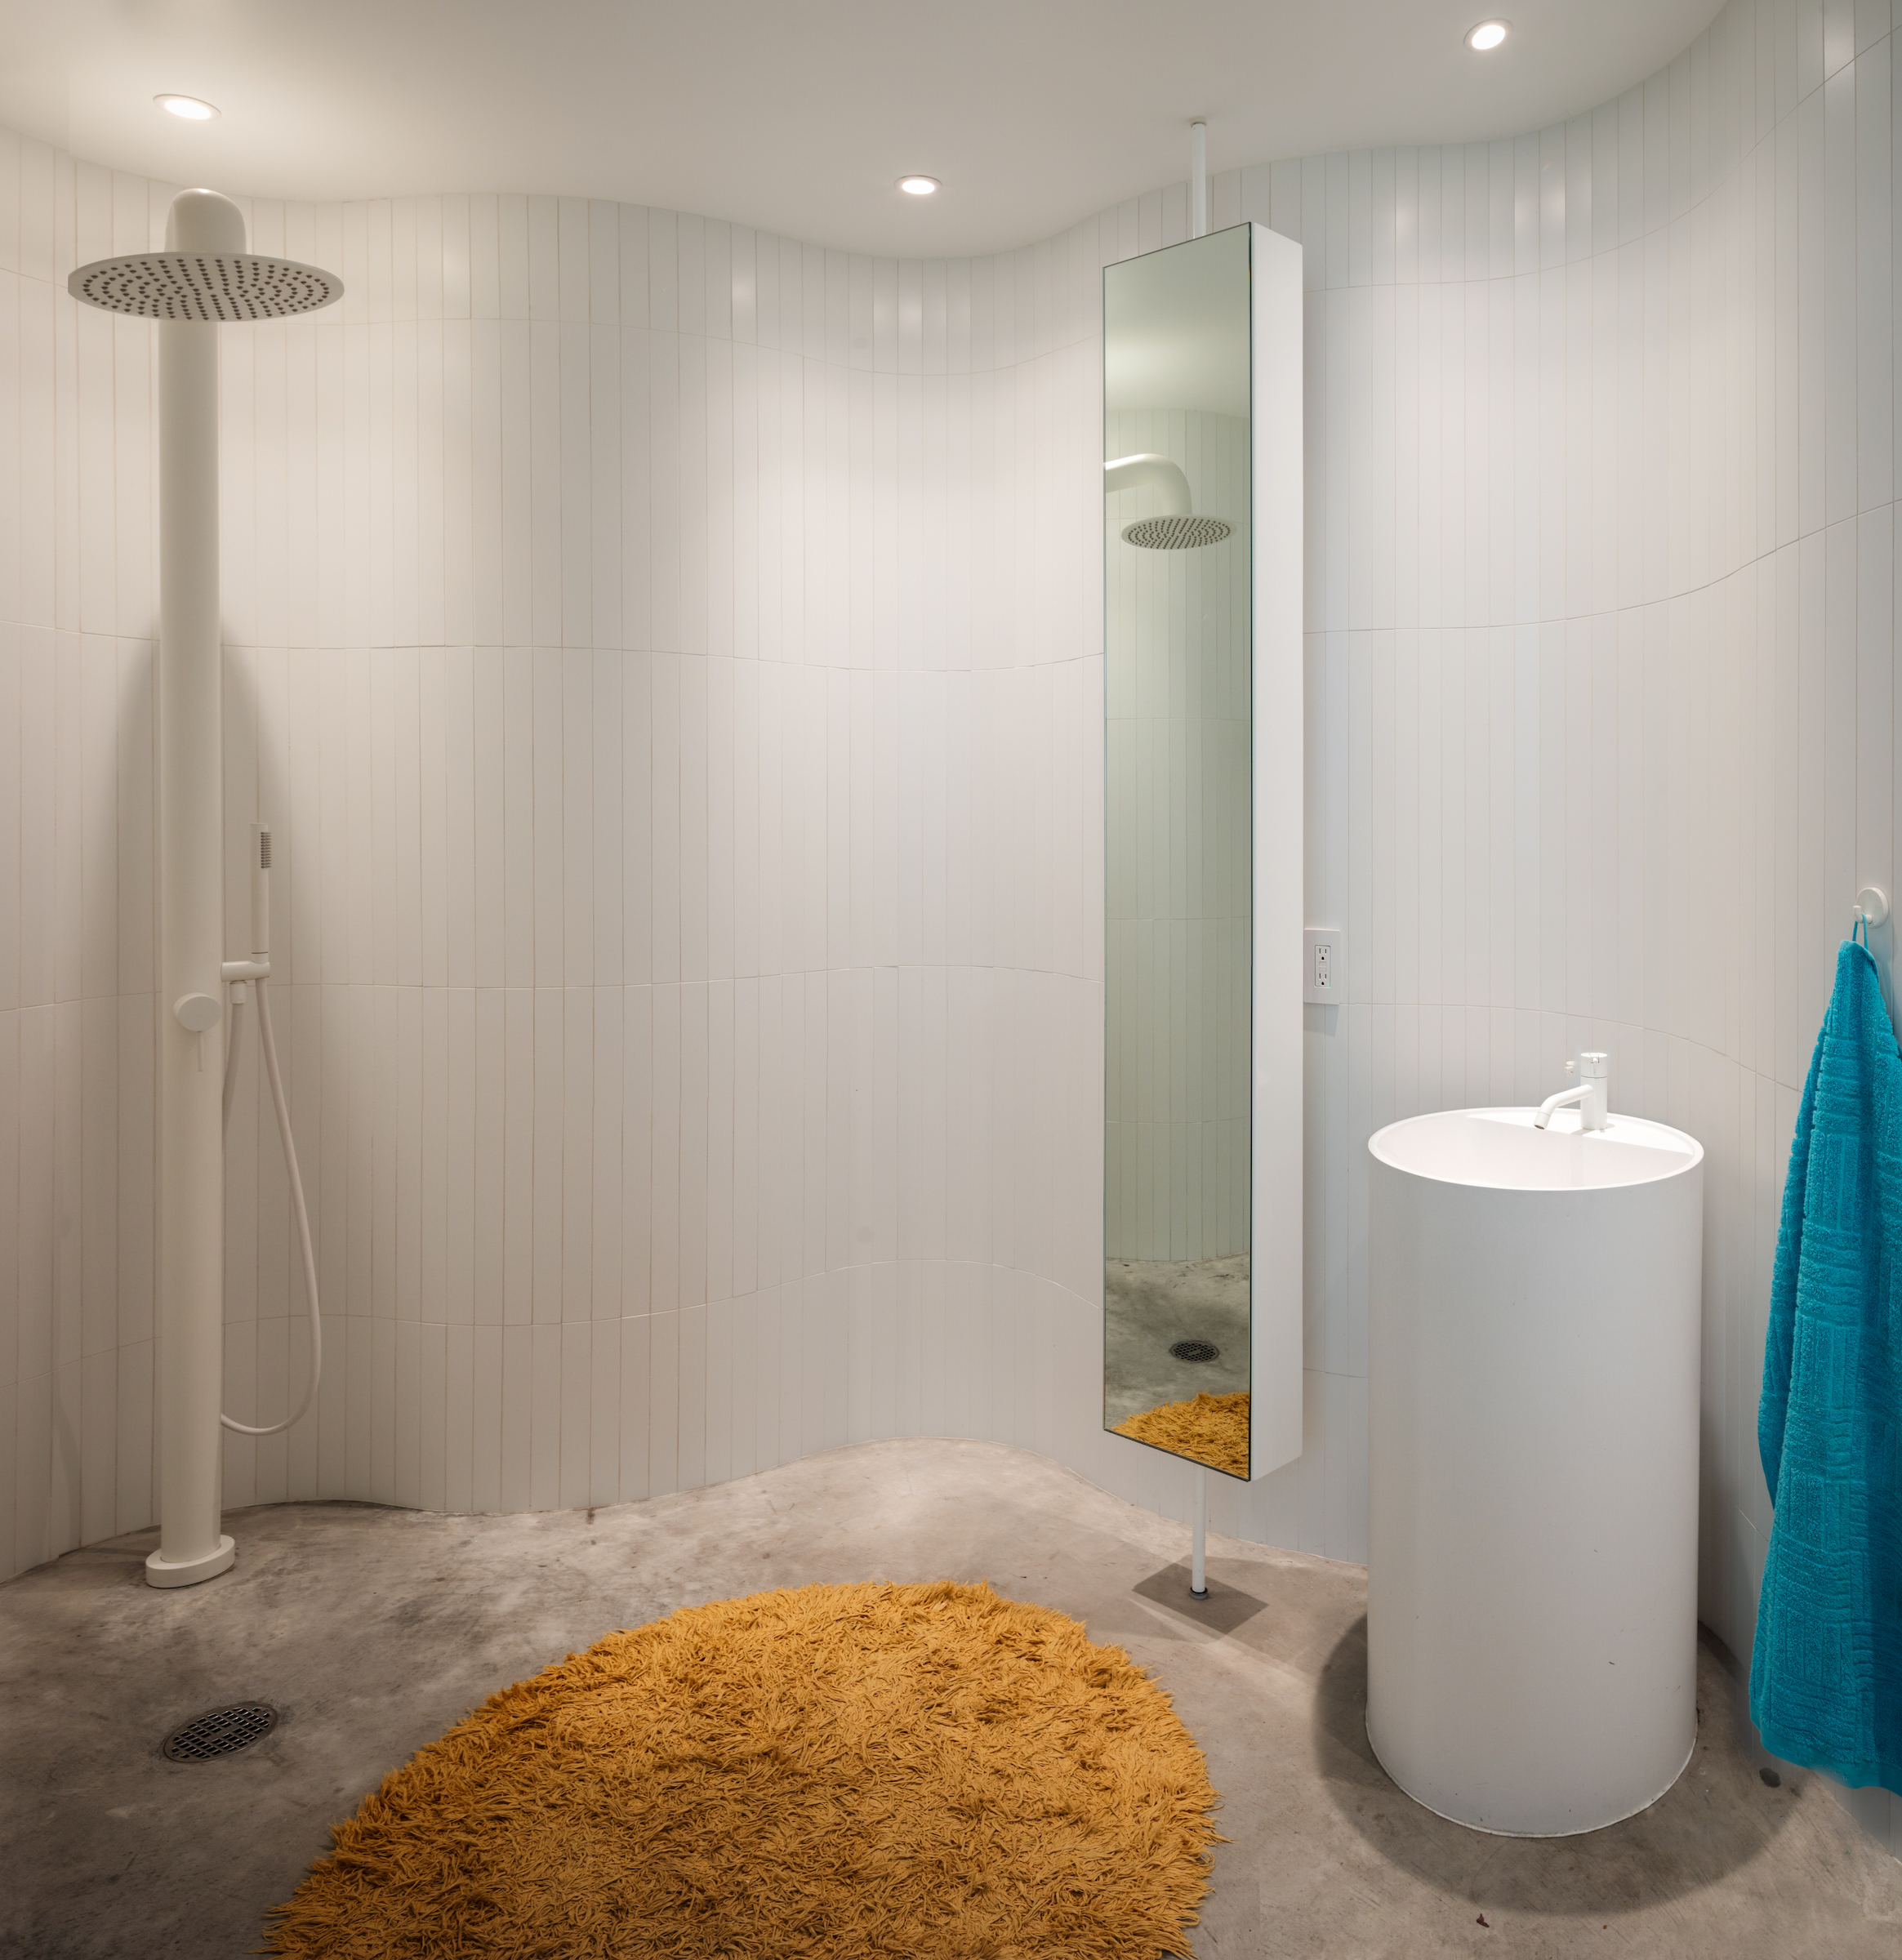 Modern bathroom with a white cylindrical sink, a shaggy orange rug, and a glass shower enclosure with a rain showerhead.